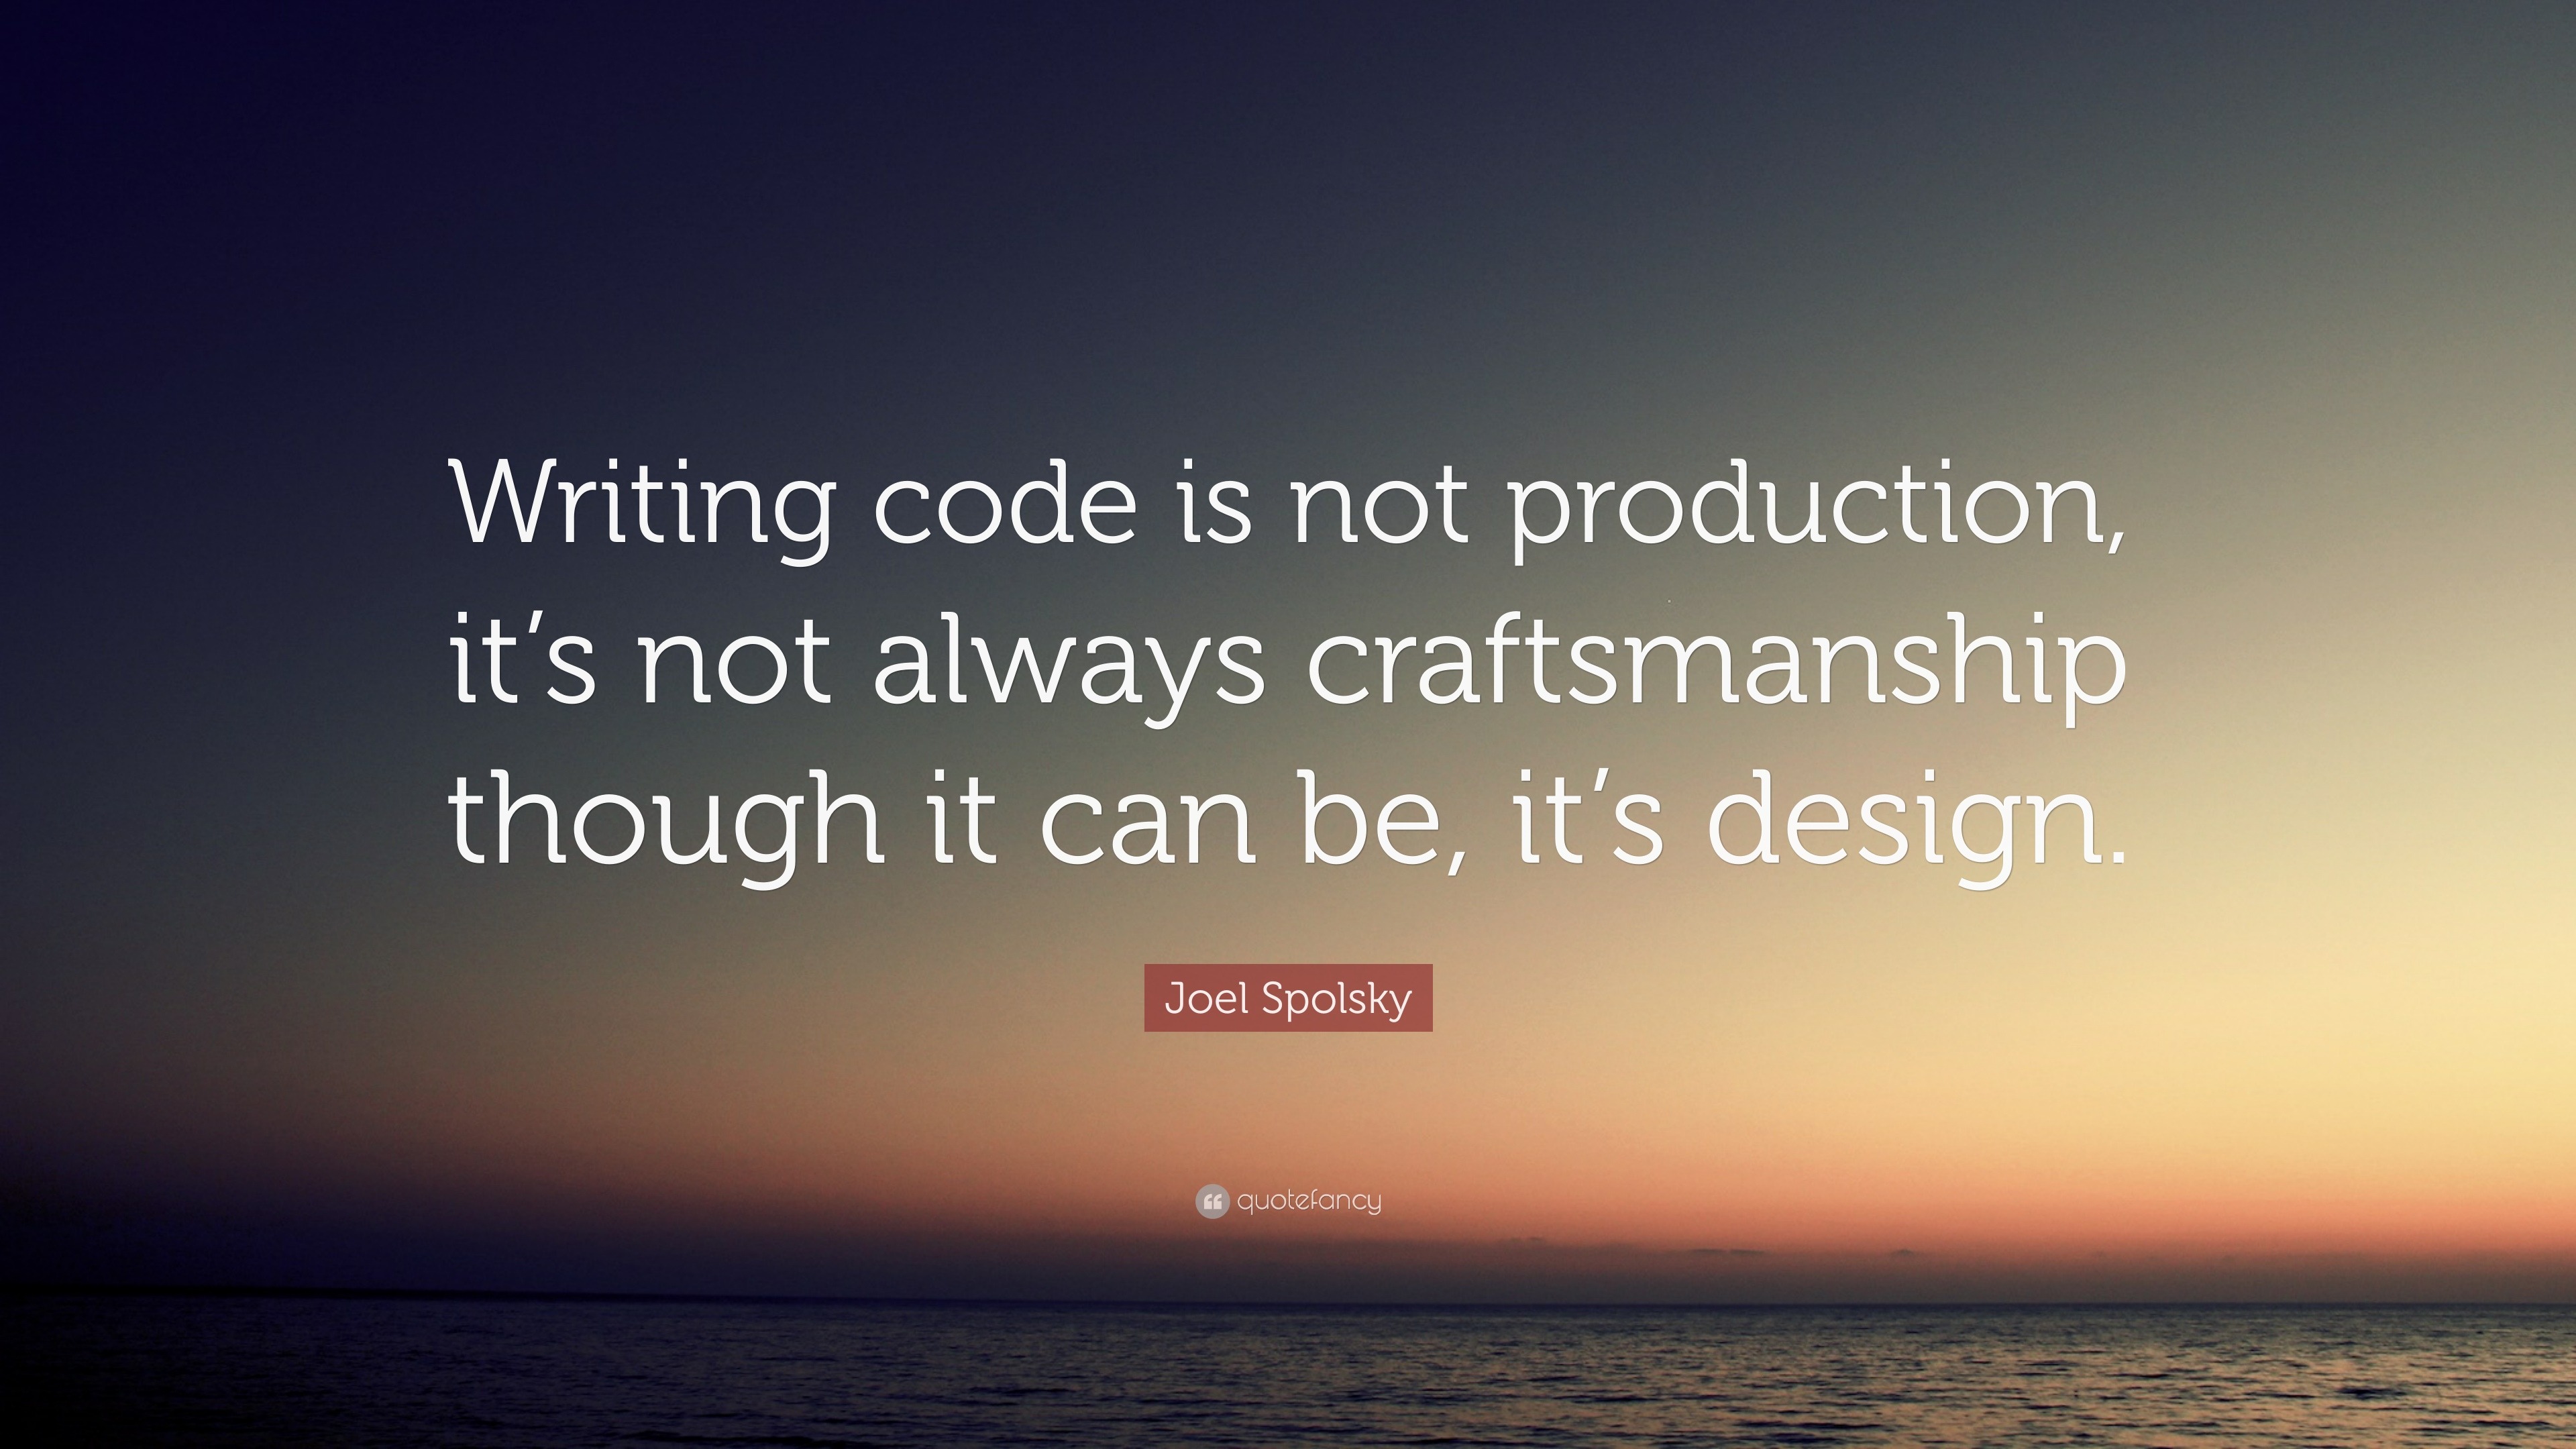 Programming Quotes (16 wallpapers) - Quotefancy